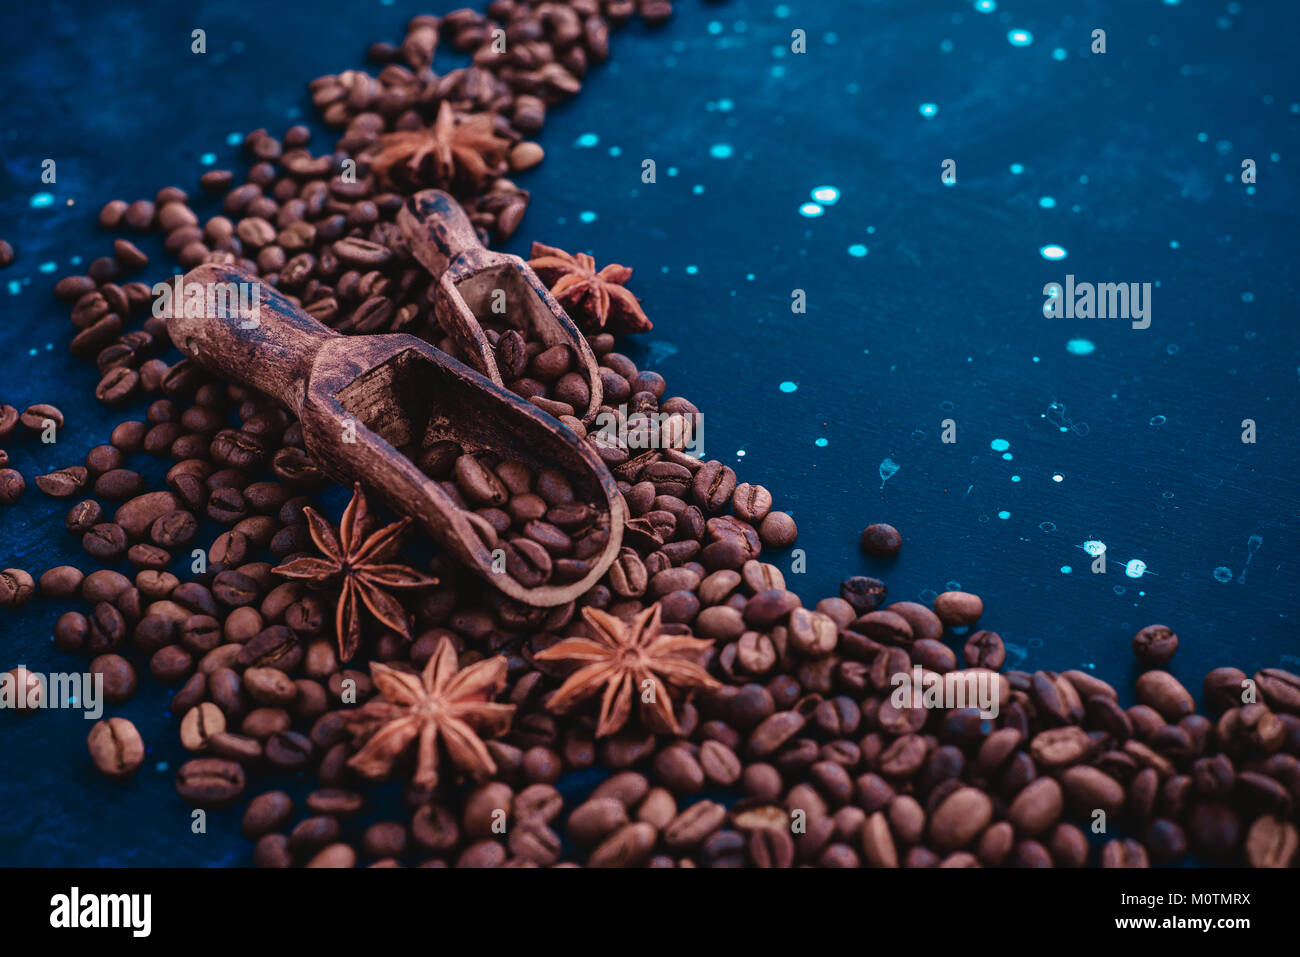 Close-up of two wooden scoops for coffee beans with cinnamon and anise stars on a dark blue background. Vintage barista concept. Stock Photo